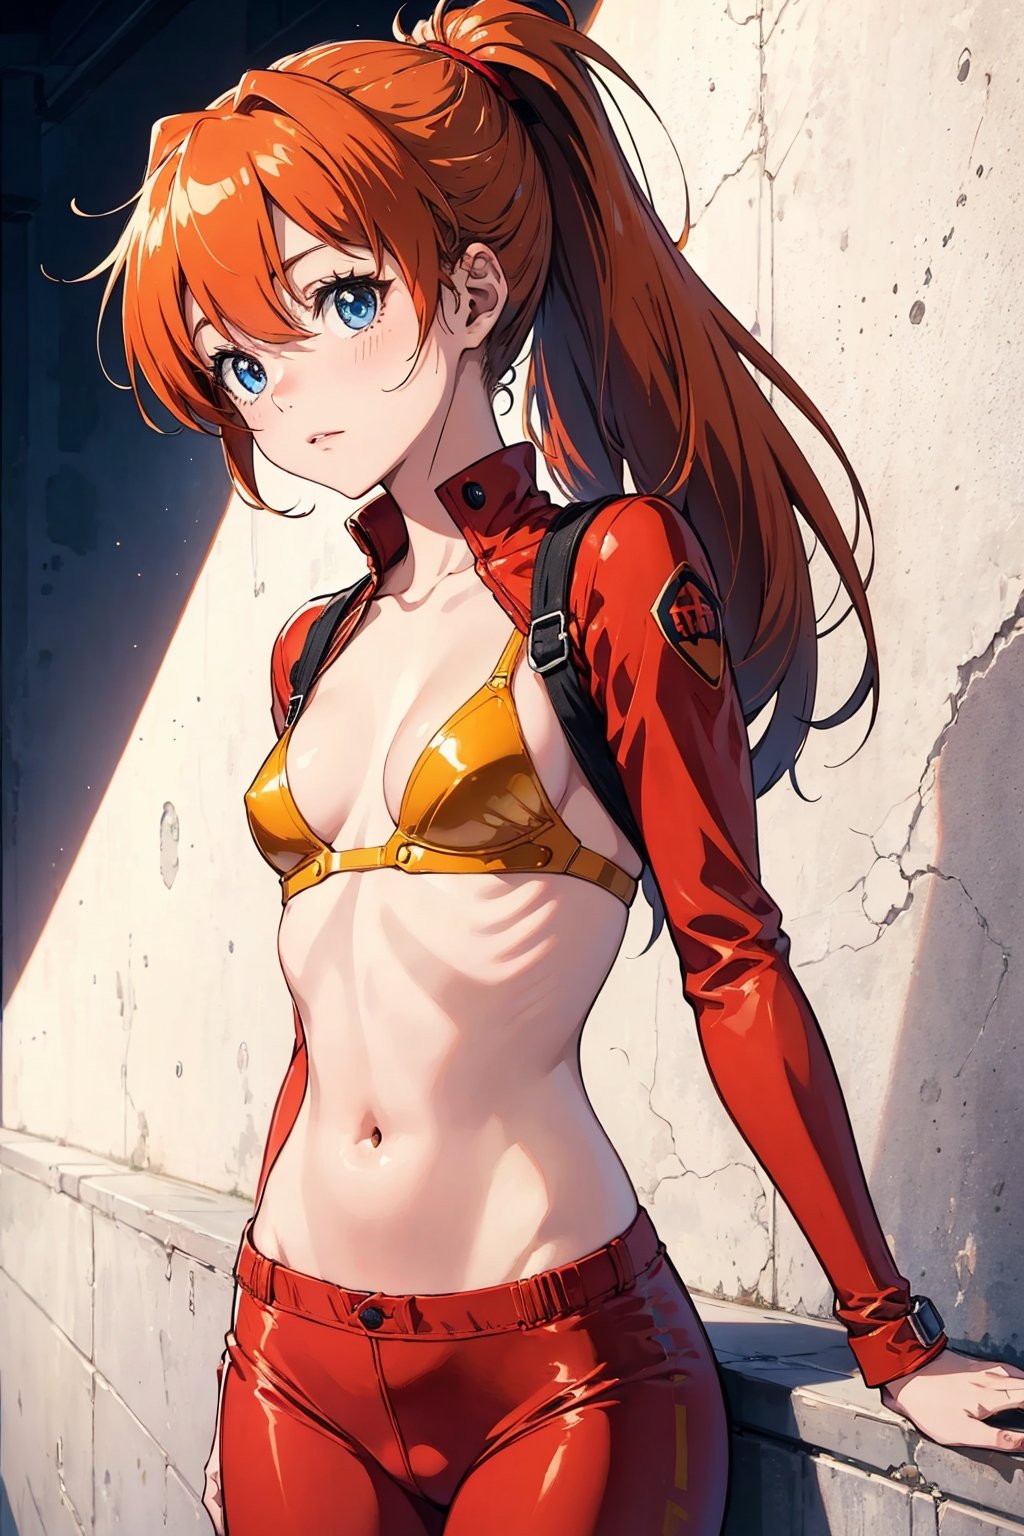 Prompt
Asuka Langley, teenage girl, 2 ponytail hair . Orange hair, with bangs, in a red suit, petite body , perfect body, pretty face, blue eyes, high quality image